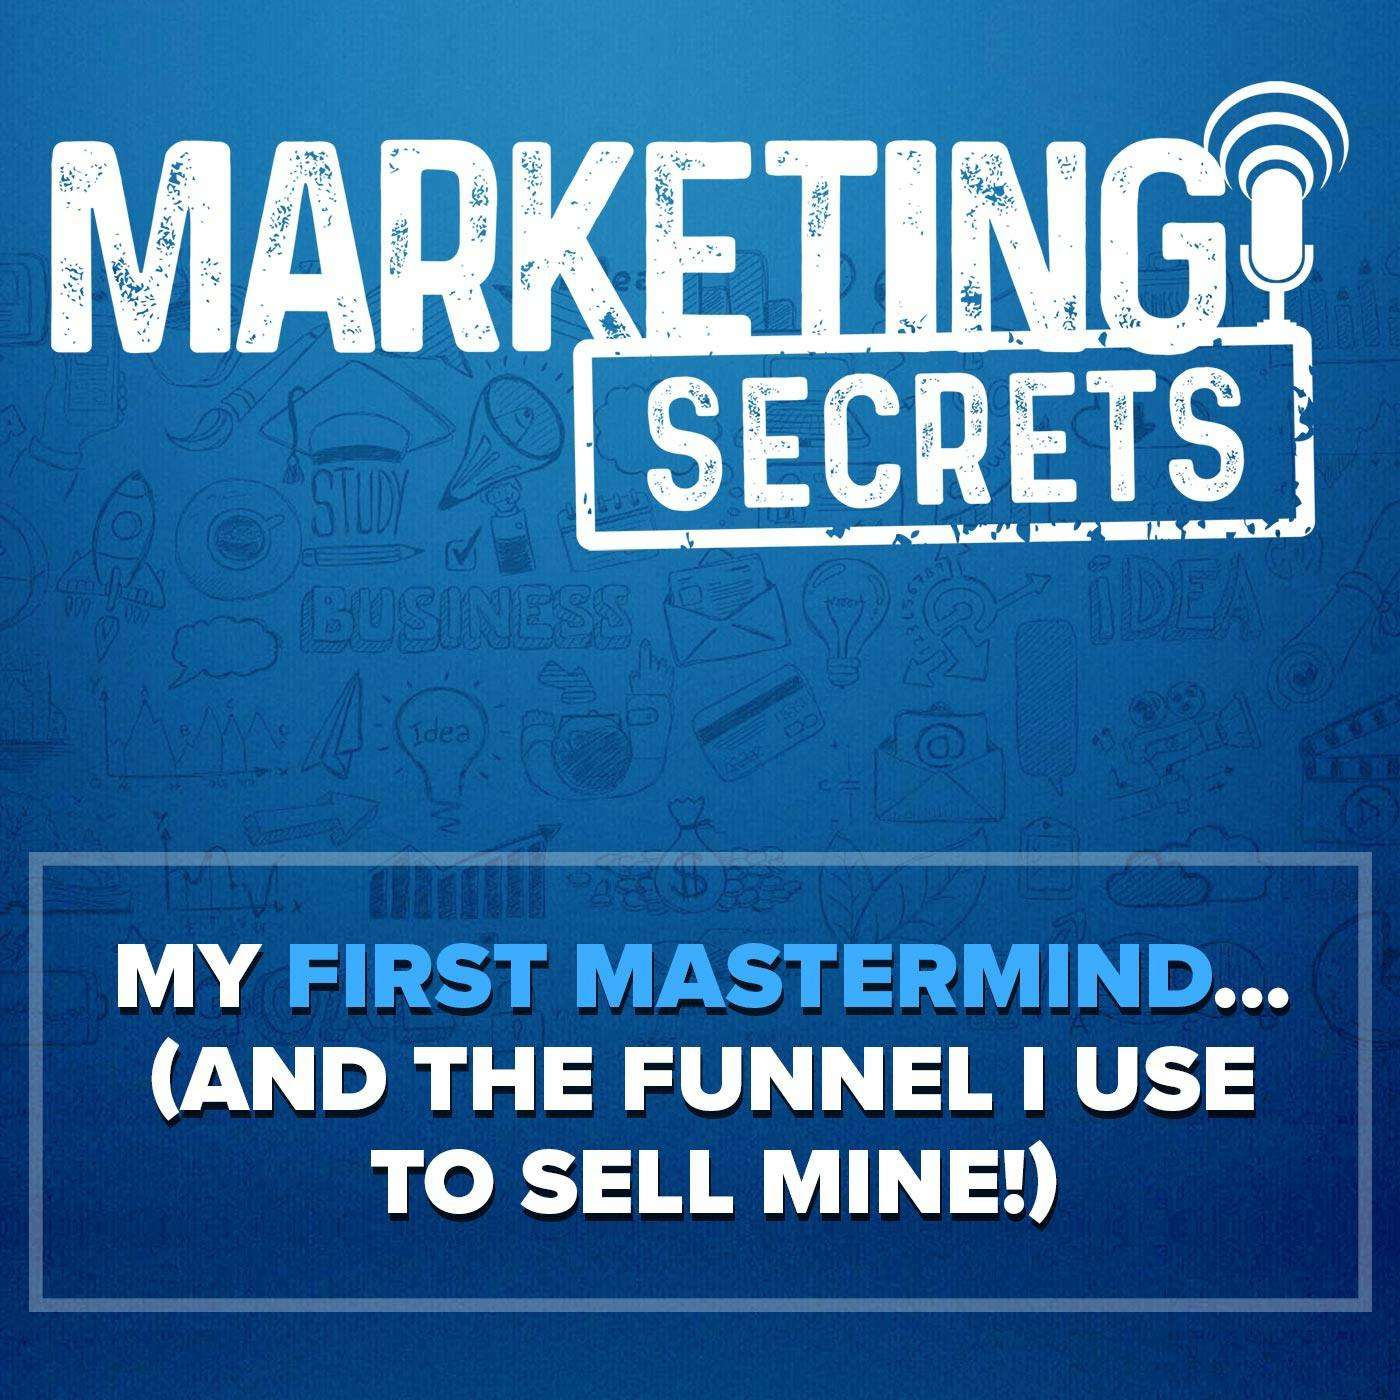 My First Mastermind... (and the Funnel I Use to Sell Mine!)